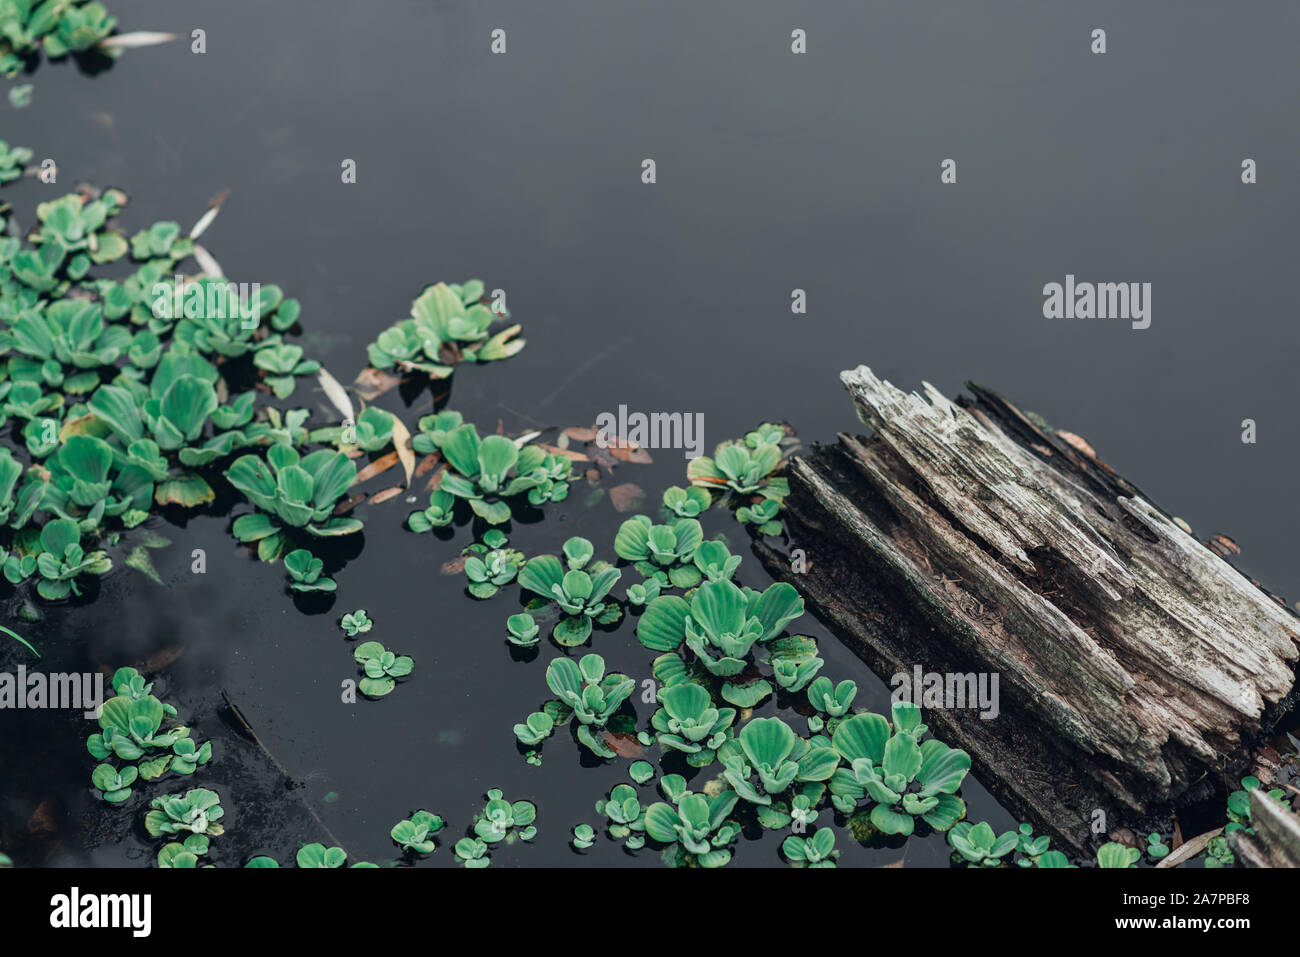 Driftwood in pond with green plants in water, snag. Stock Photo